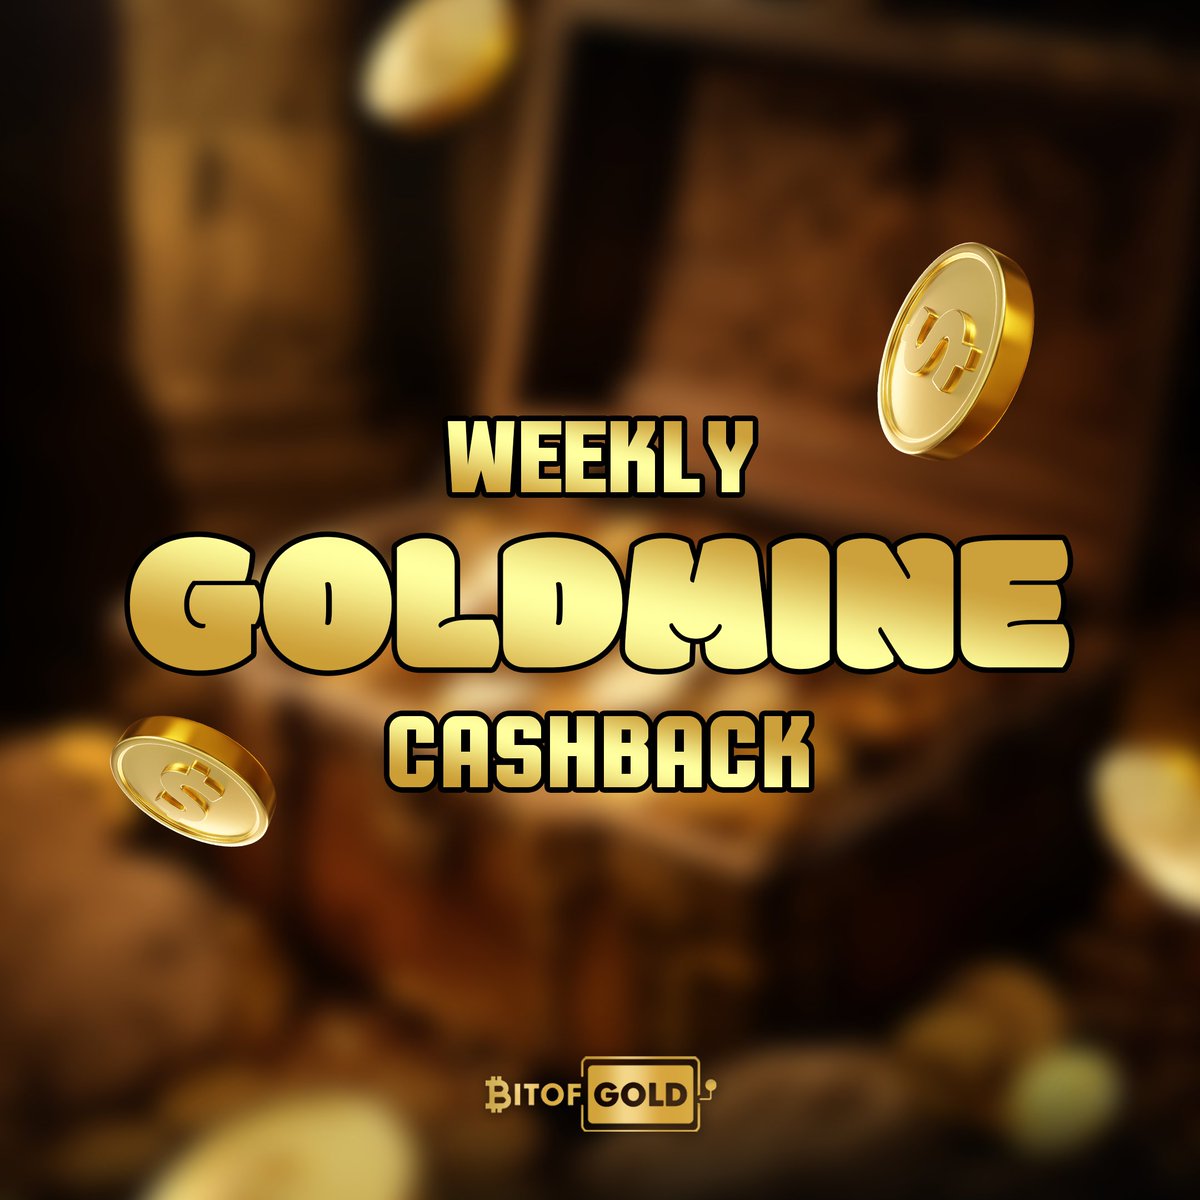 🥳Weekly GOLDMINE CASHBACK! 🥳

💸Beat the Monday blues with our exclusive Weekly Goldmine Cashback and get a chance to earn up to $300 worth of free credits at BitOfGold.

Join now: t.ly/goldmineweekly…

#weeklygoldmine #potofgold #bitofgold #bitofgolddeposit